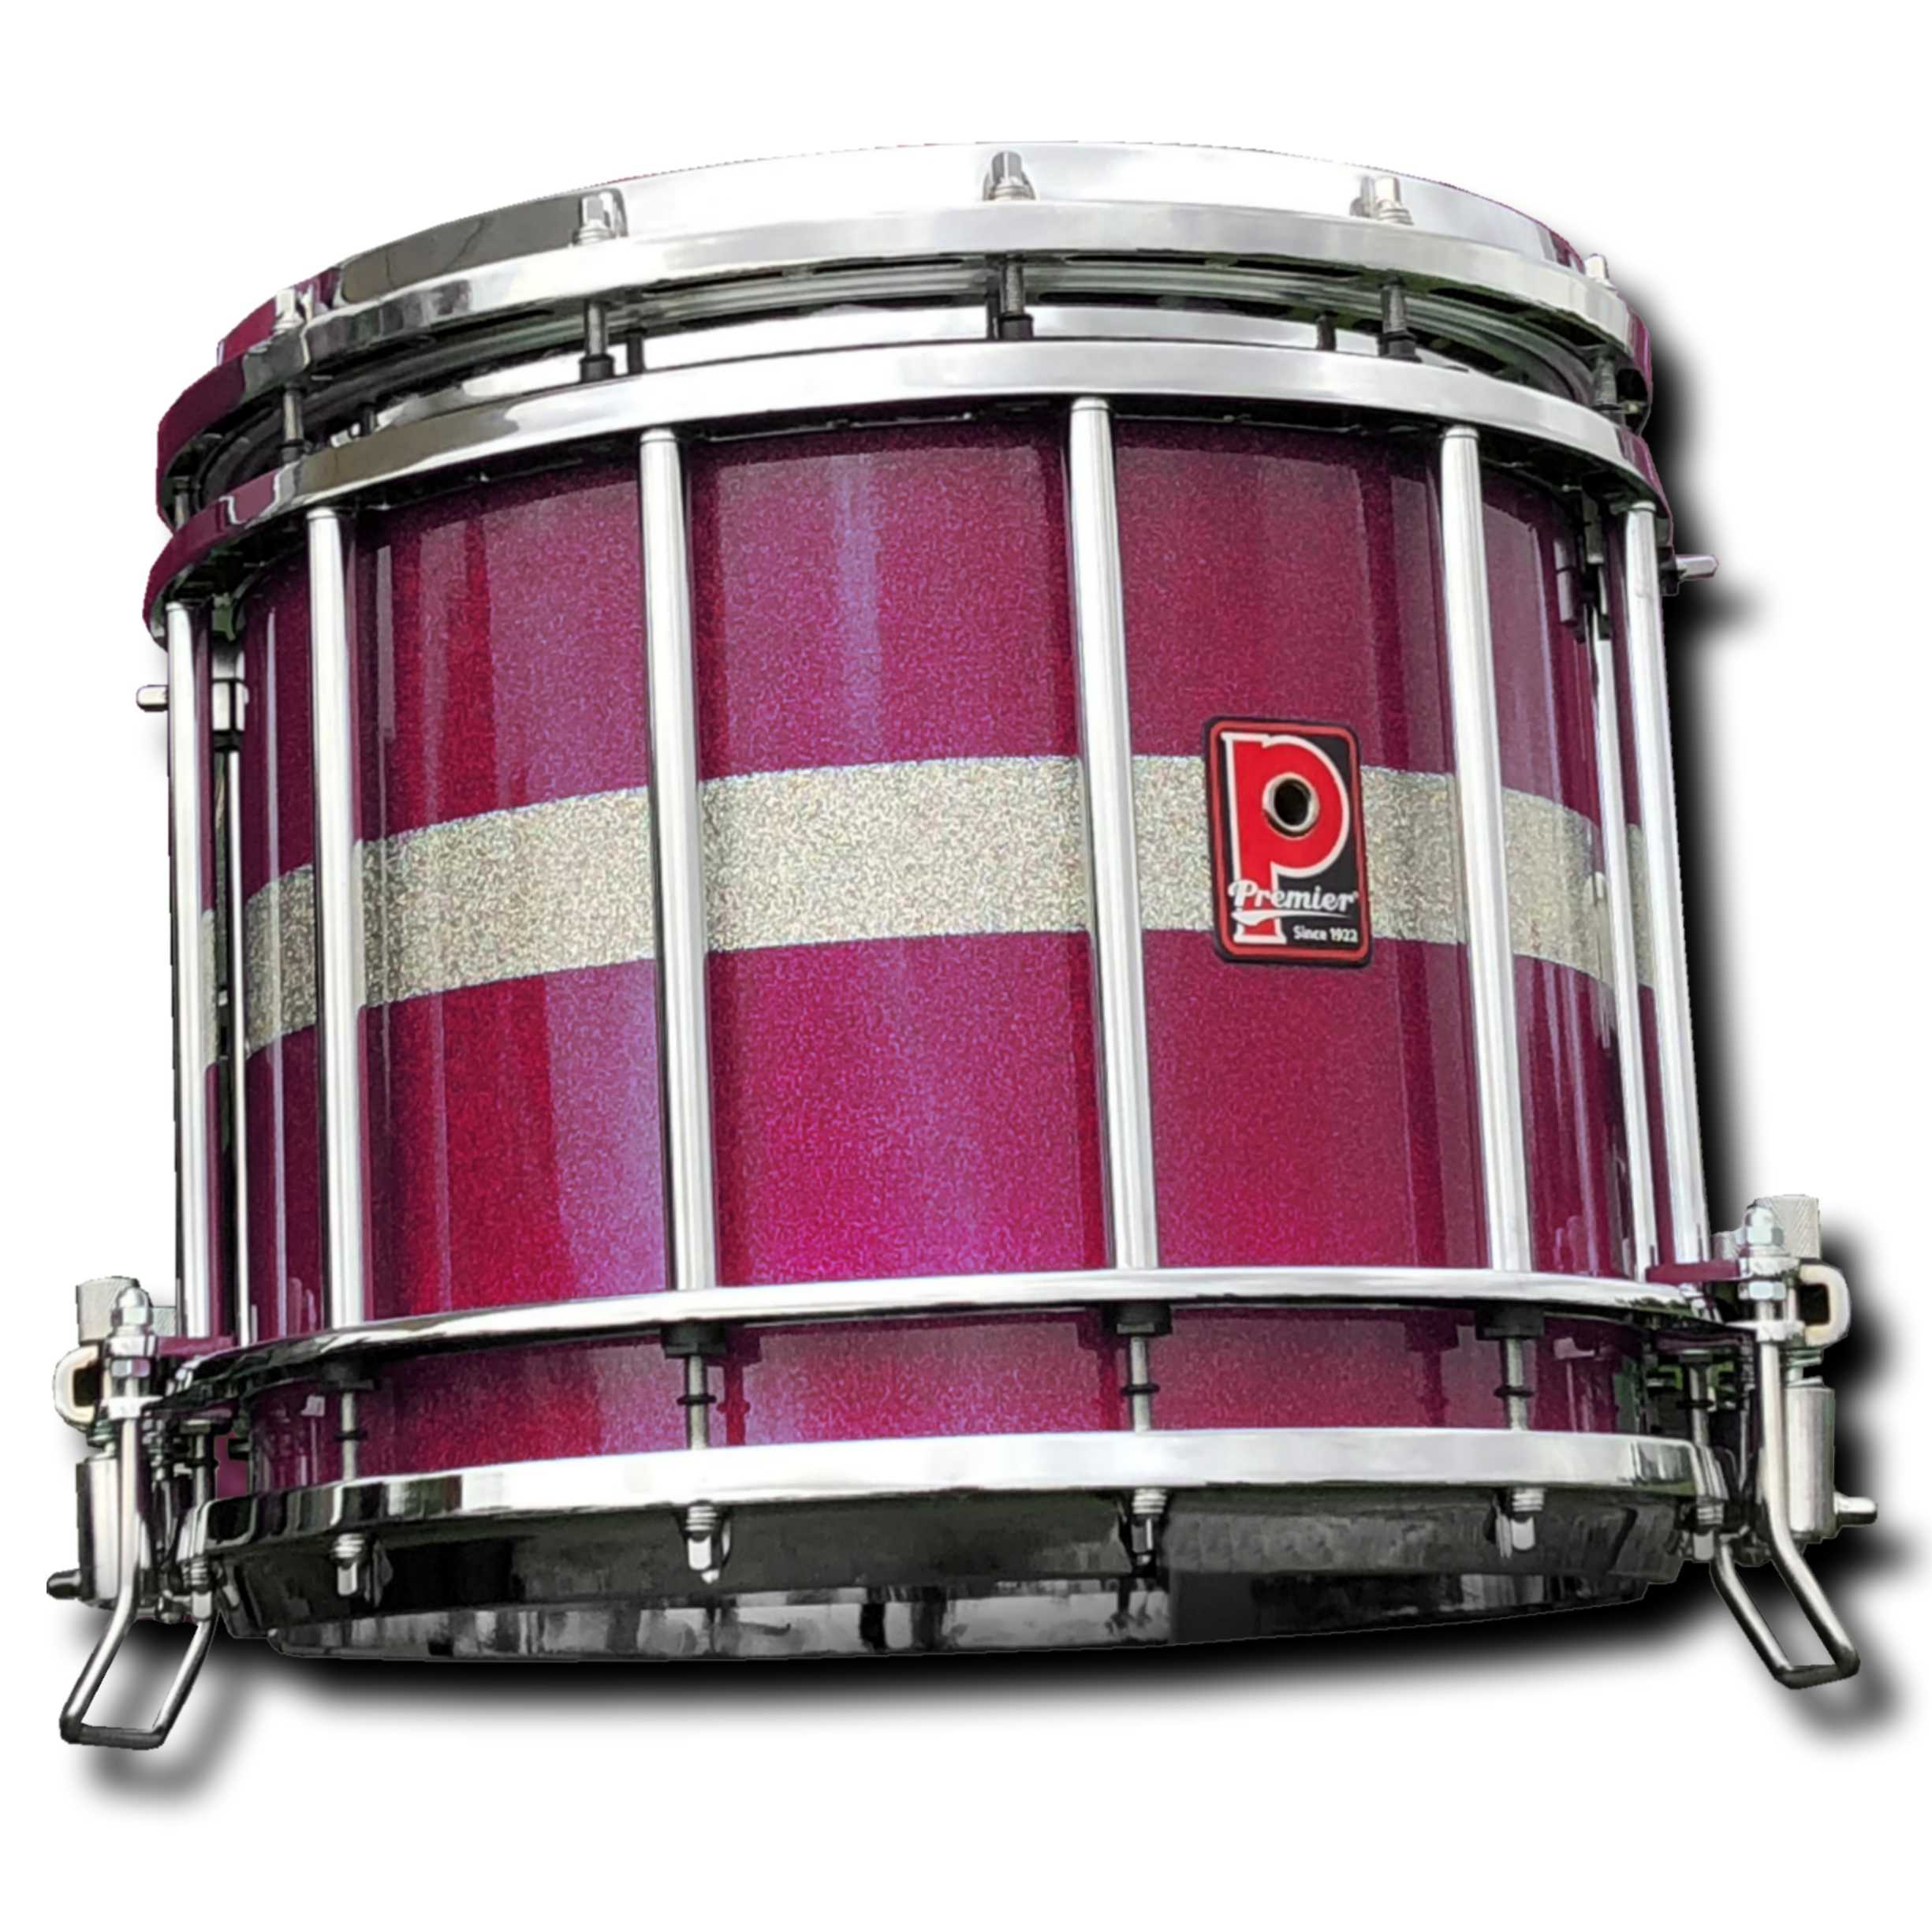 Premier Pipe Band HTS-0800Z-C 14"x12" Side Snare Drum Amethyst to Silver Blaze Sparkle - Chrome